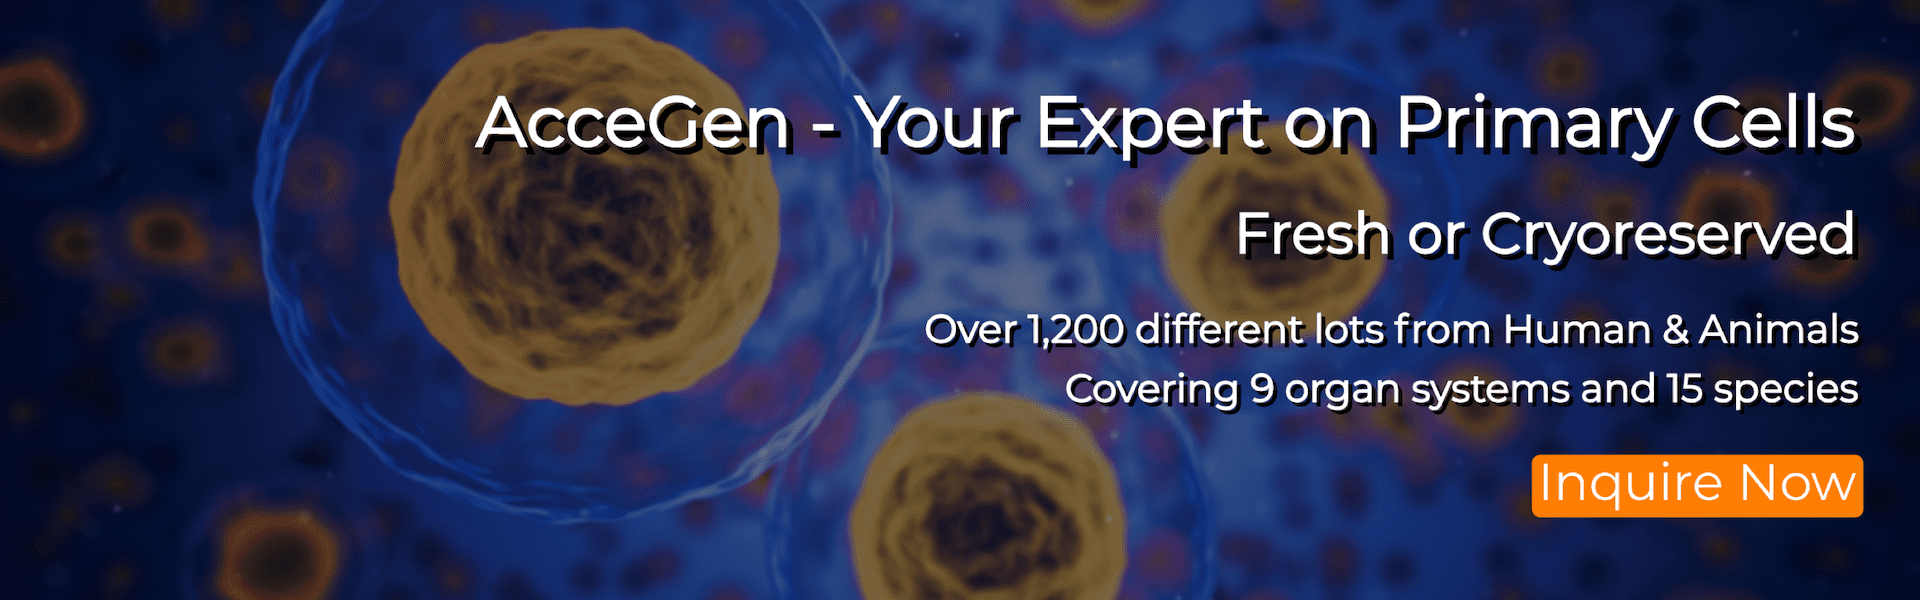 AcceGen - Your Expert on Primary Cells